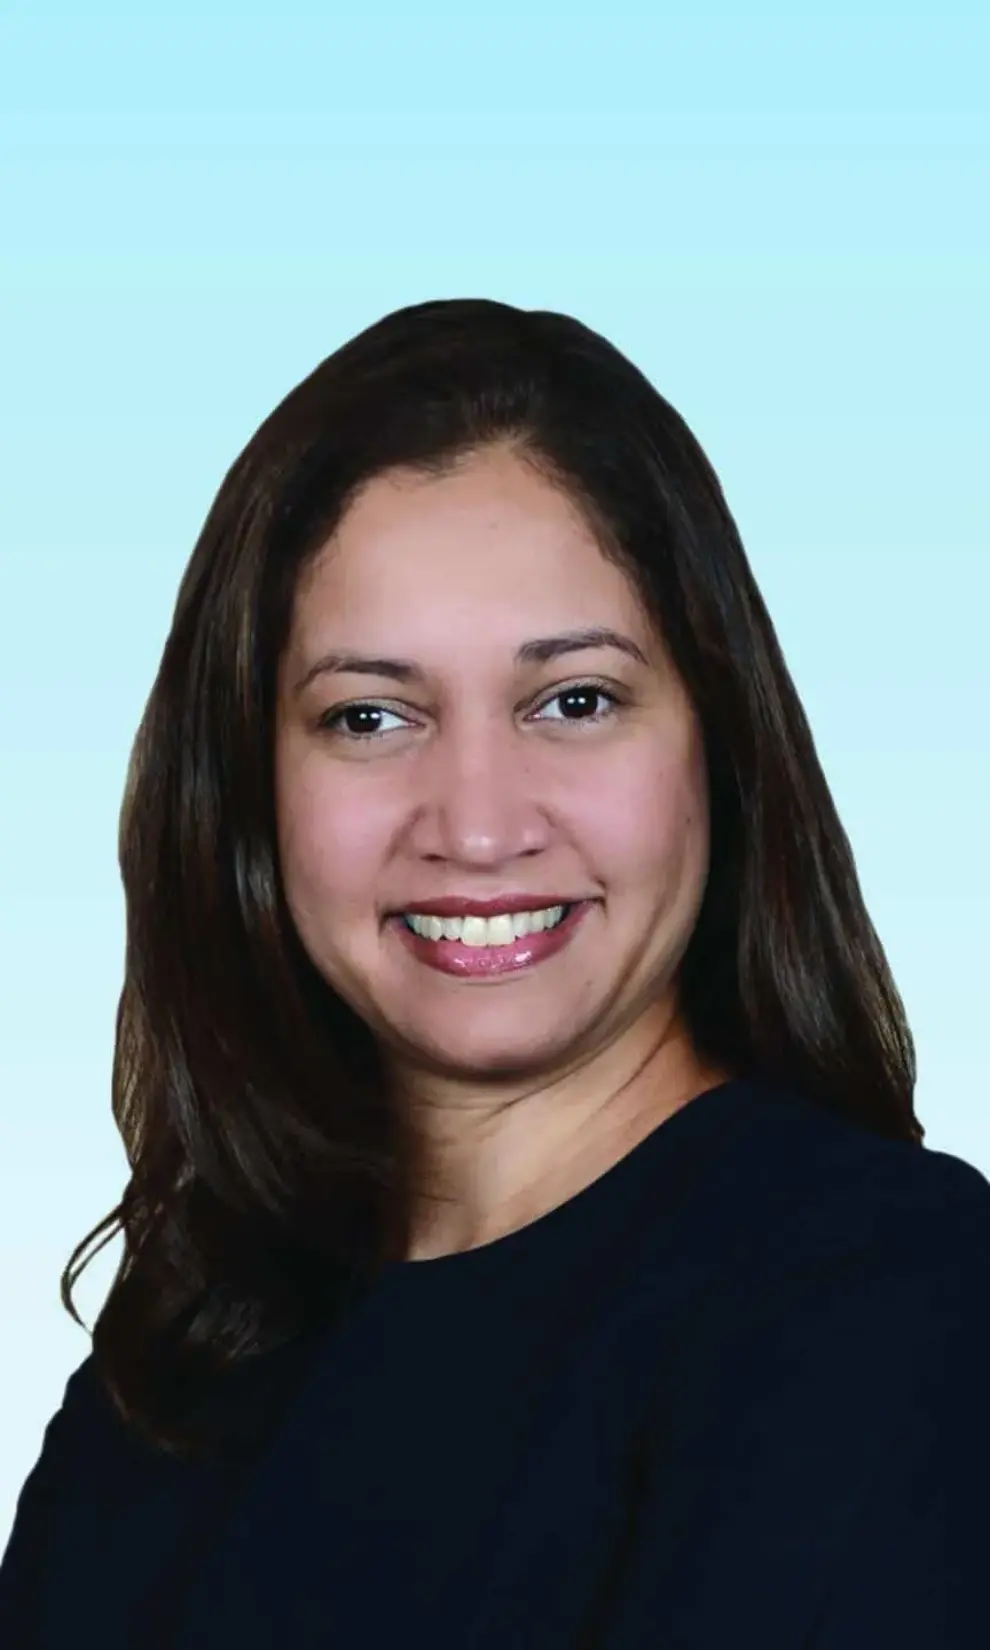 Indhira Figuereo to Lead U.S. Aviation Practice at WSP USA